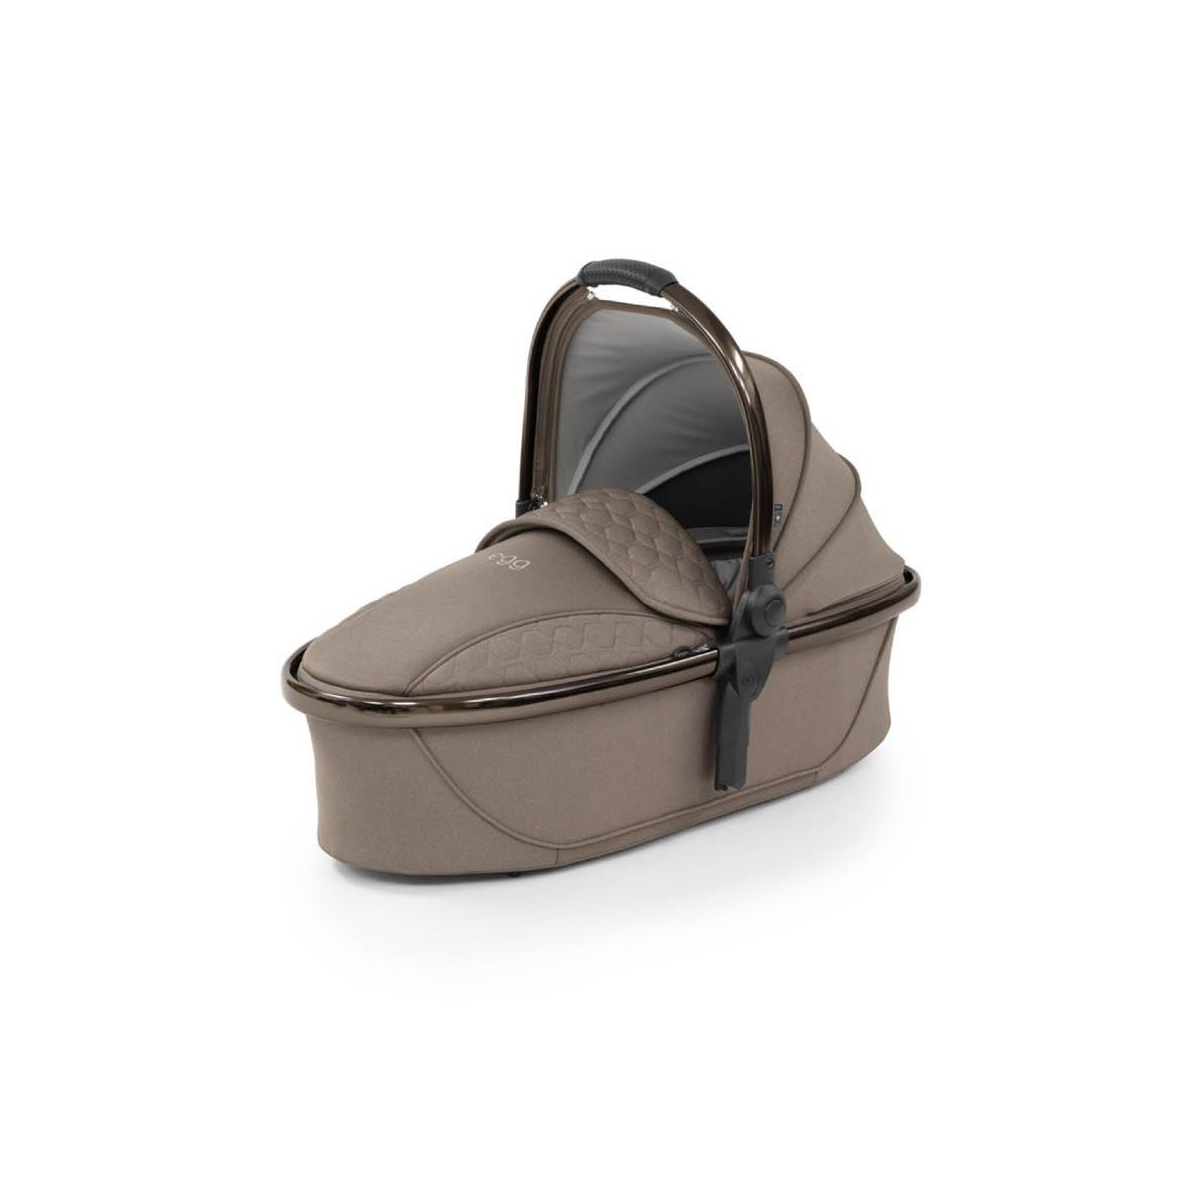 egg® 2 Carrycot